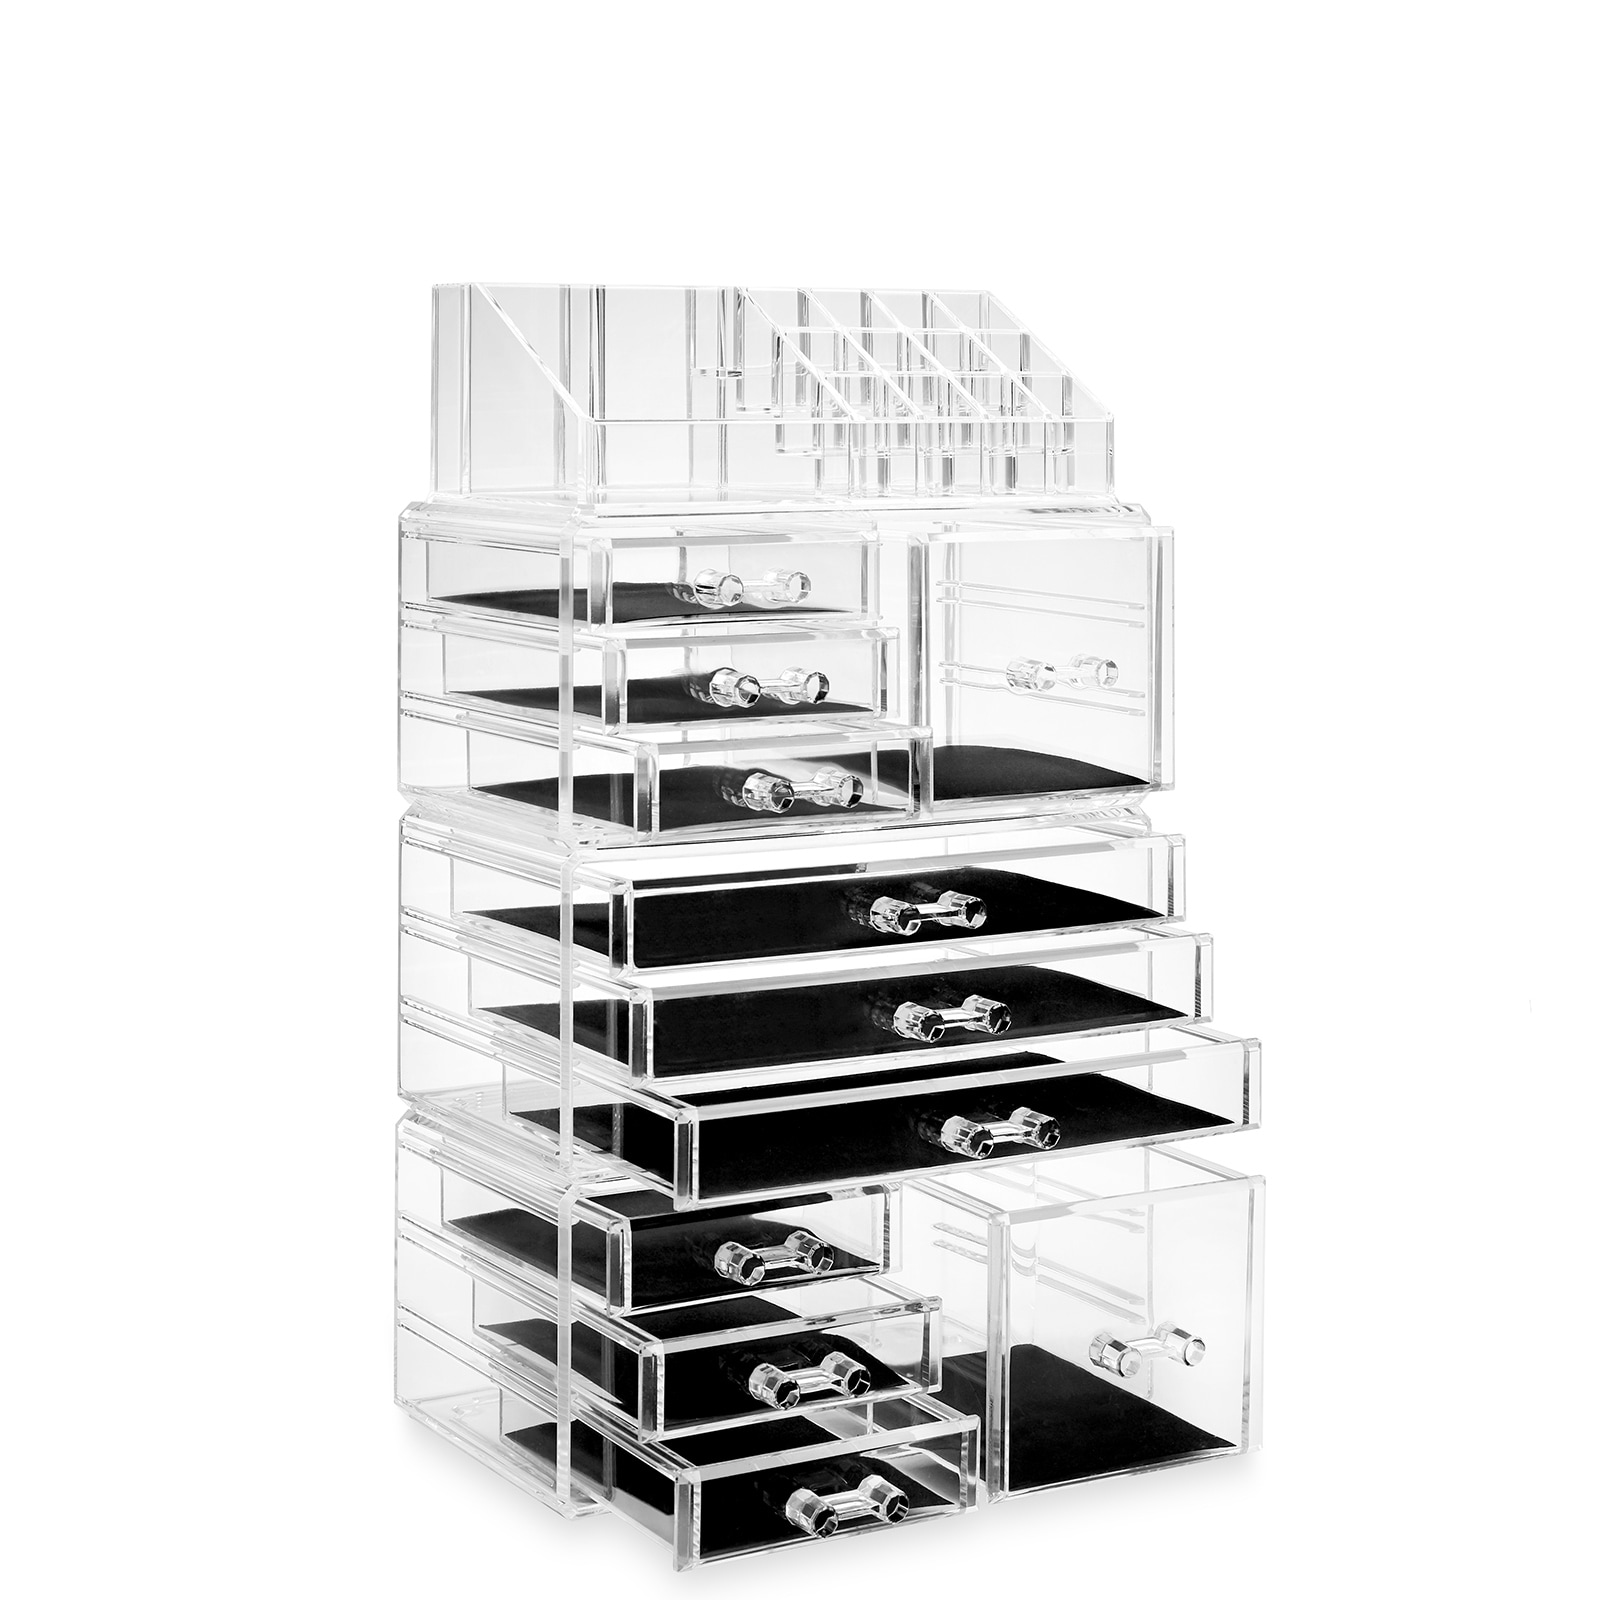 https://ak1.ostkcdn.com/images/products/is/images/direct/8c4ea9b20832b419ad337c265fc737b992aa45a9/Large-Acrylic-Cosmetic-Makeup-Organizer-Jewelry-Drawer-Storage-Box-Display-Case.jpg